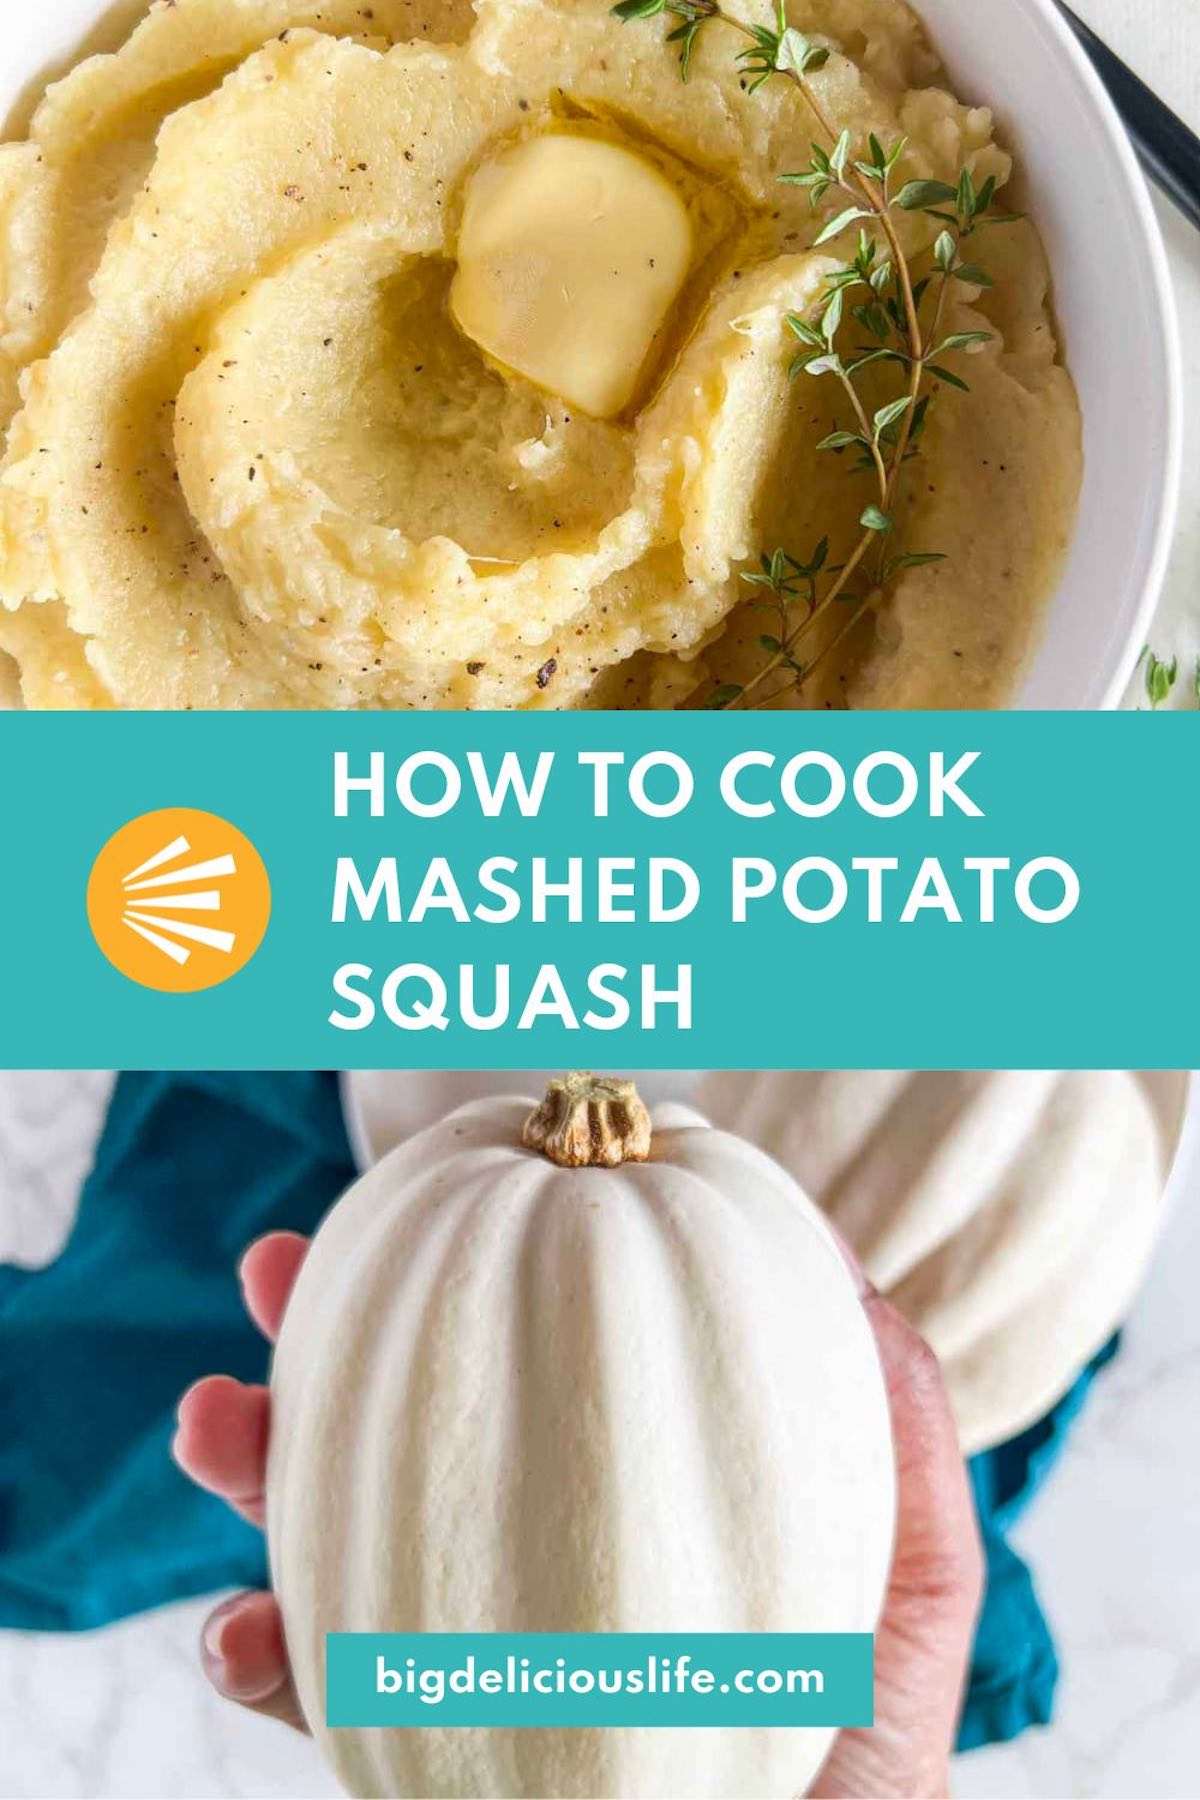 Branded Pinterest template with photos of whole mashed potato squash and finished recipe.